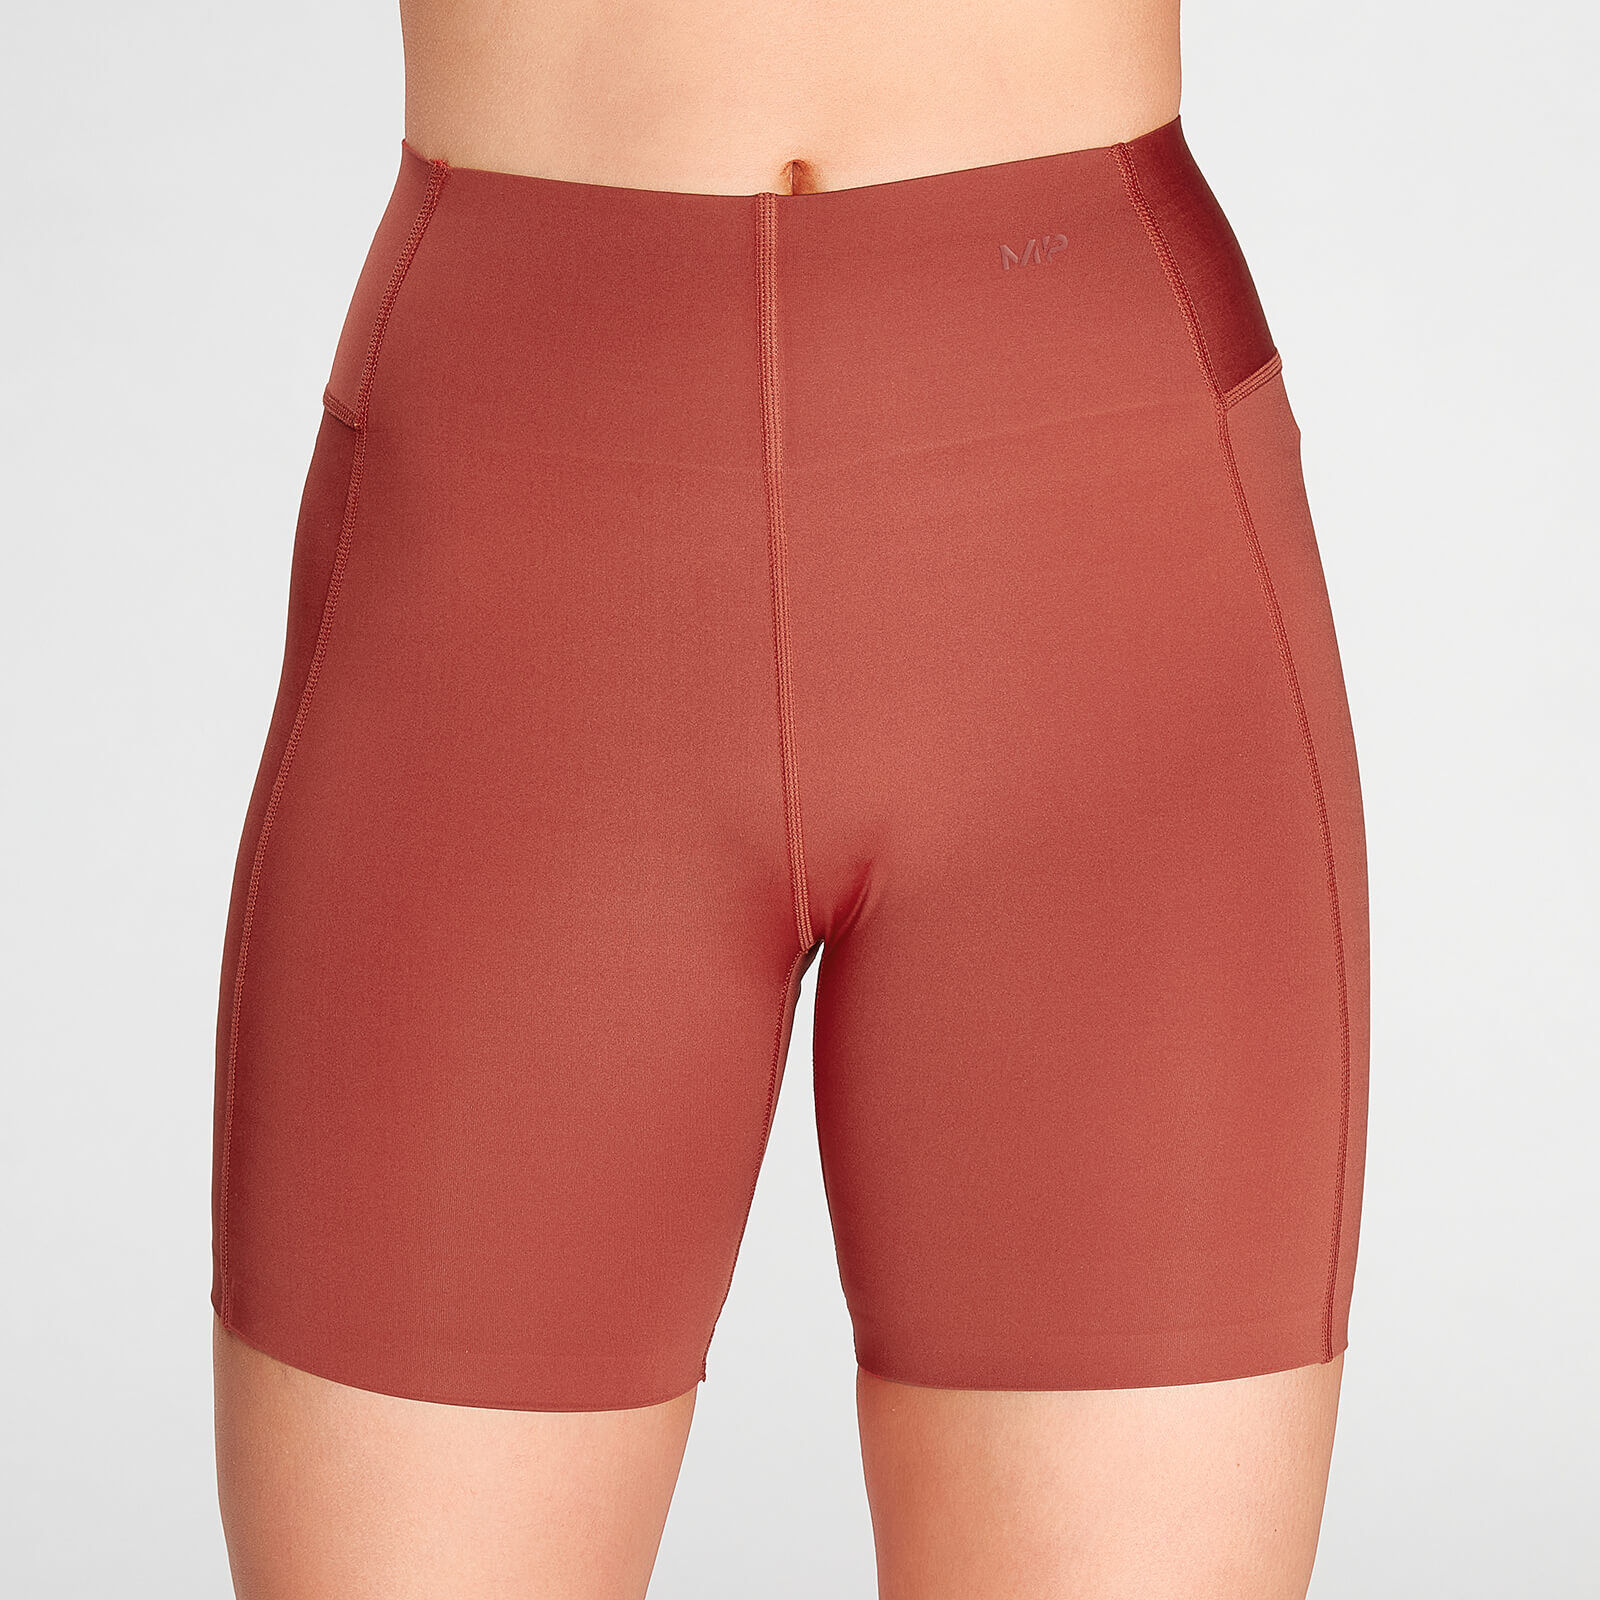 MP Women's Composure Cycling Shorts- Burnt Red - XXL